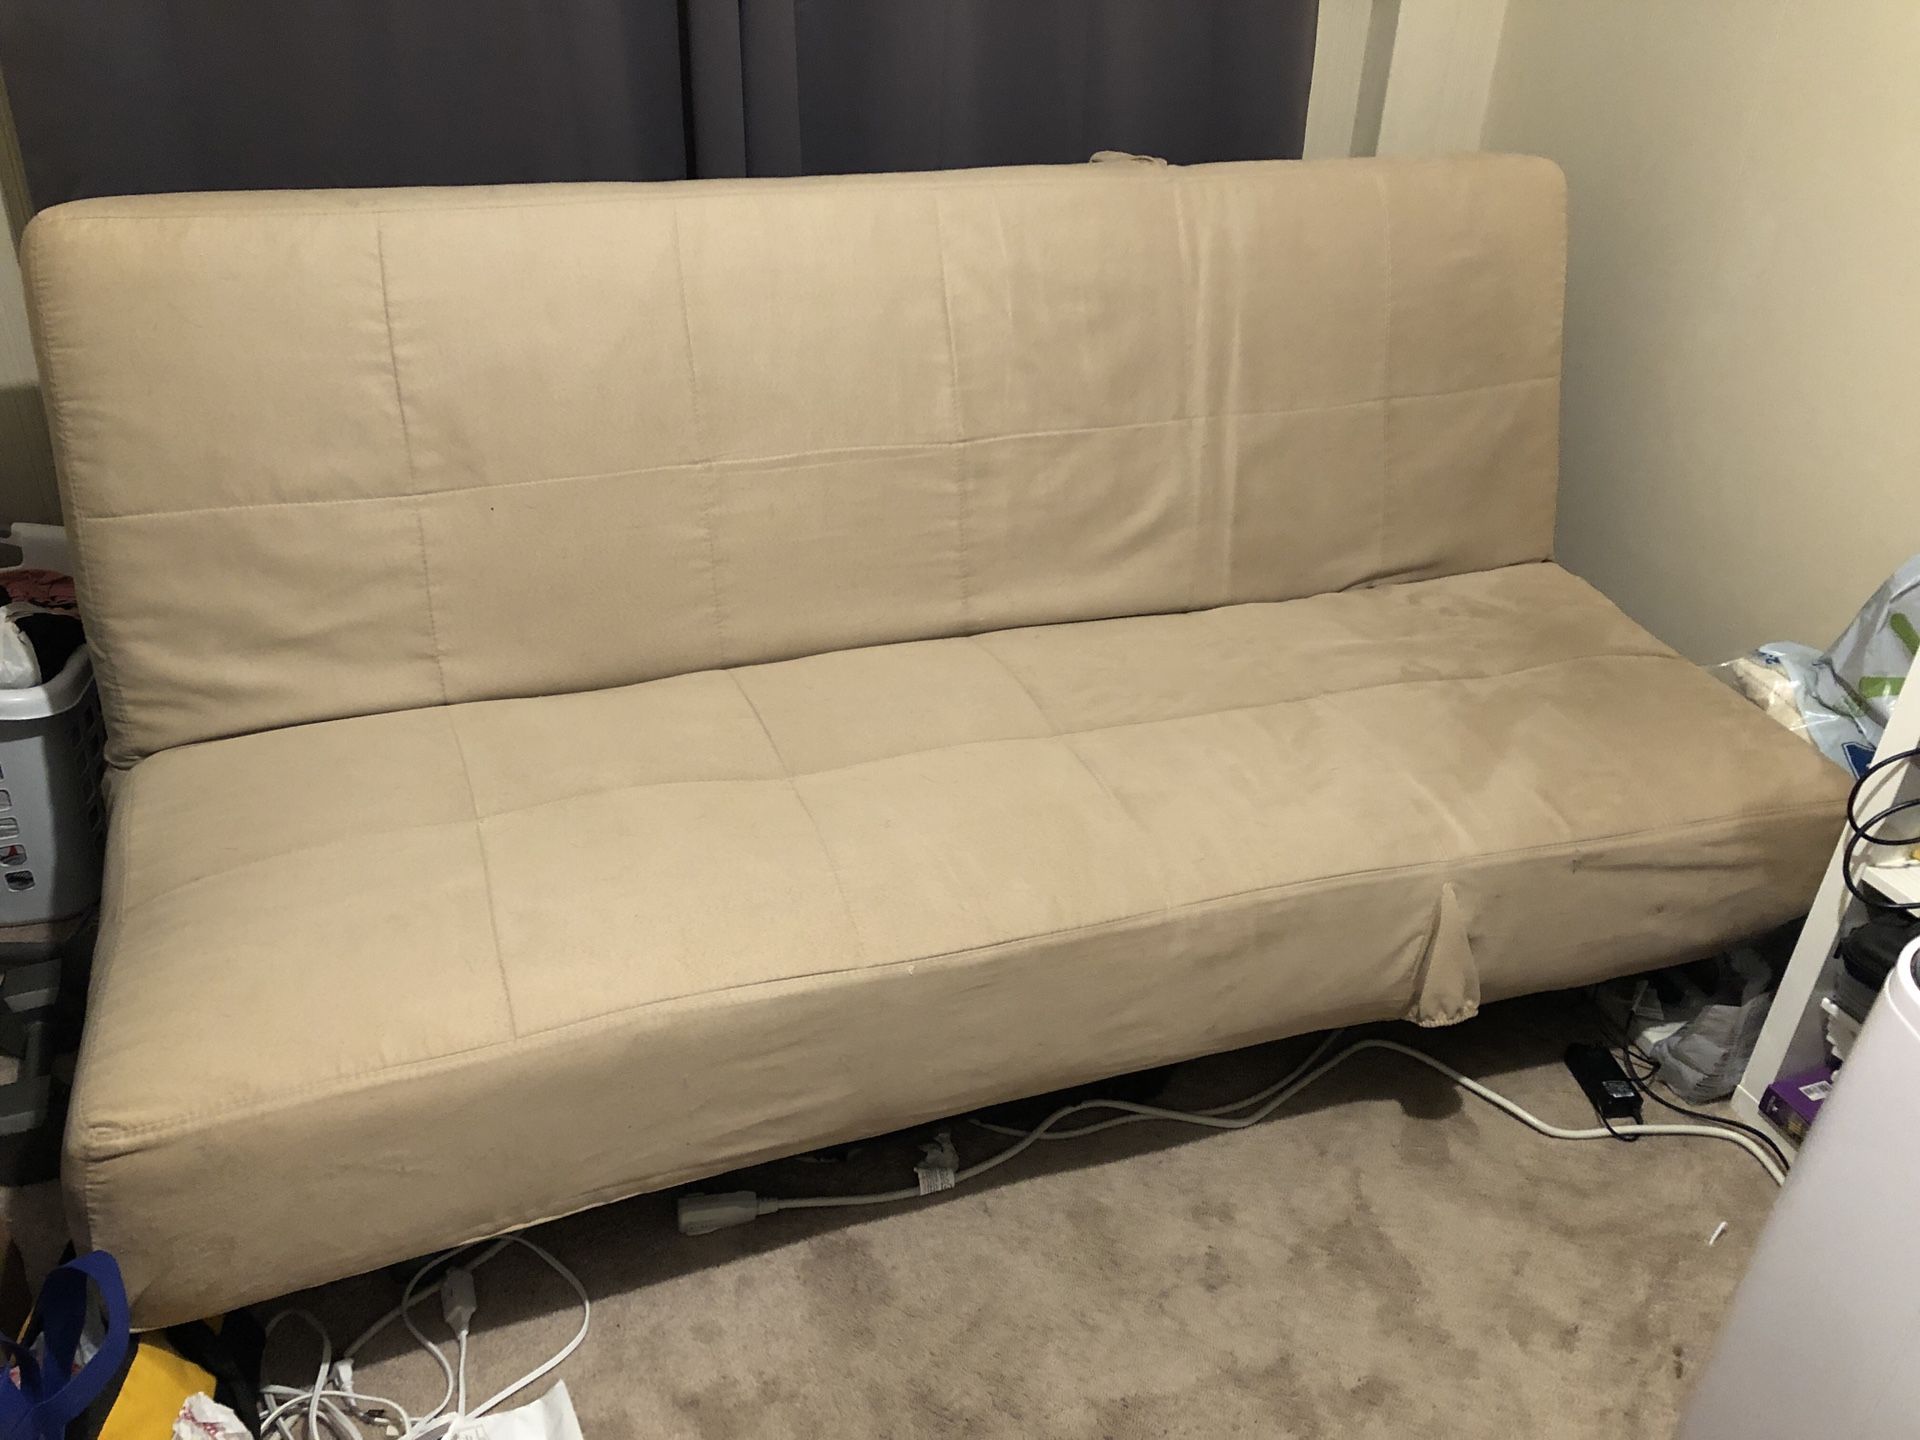 Sofa bed/ Futon/ Lounge chair/ Sofa/ Couch